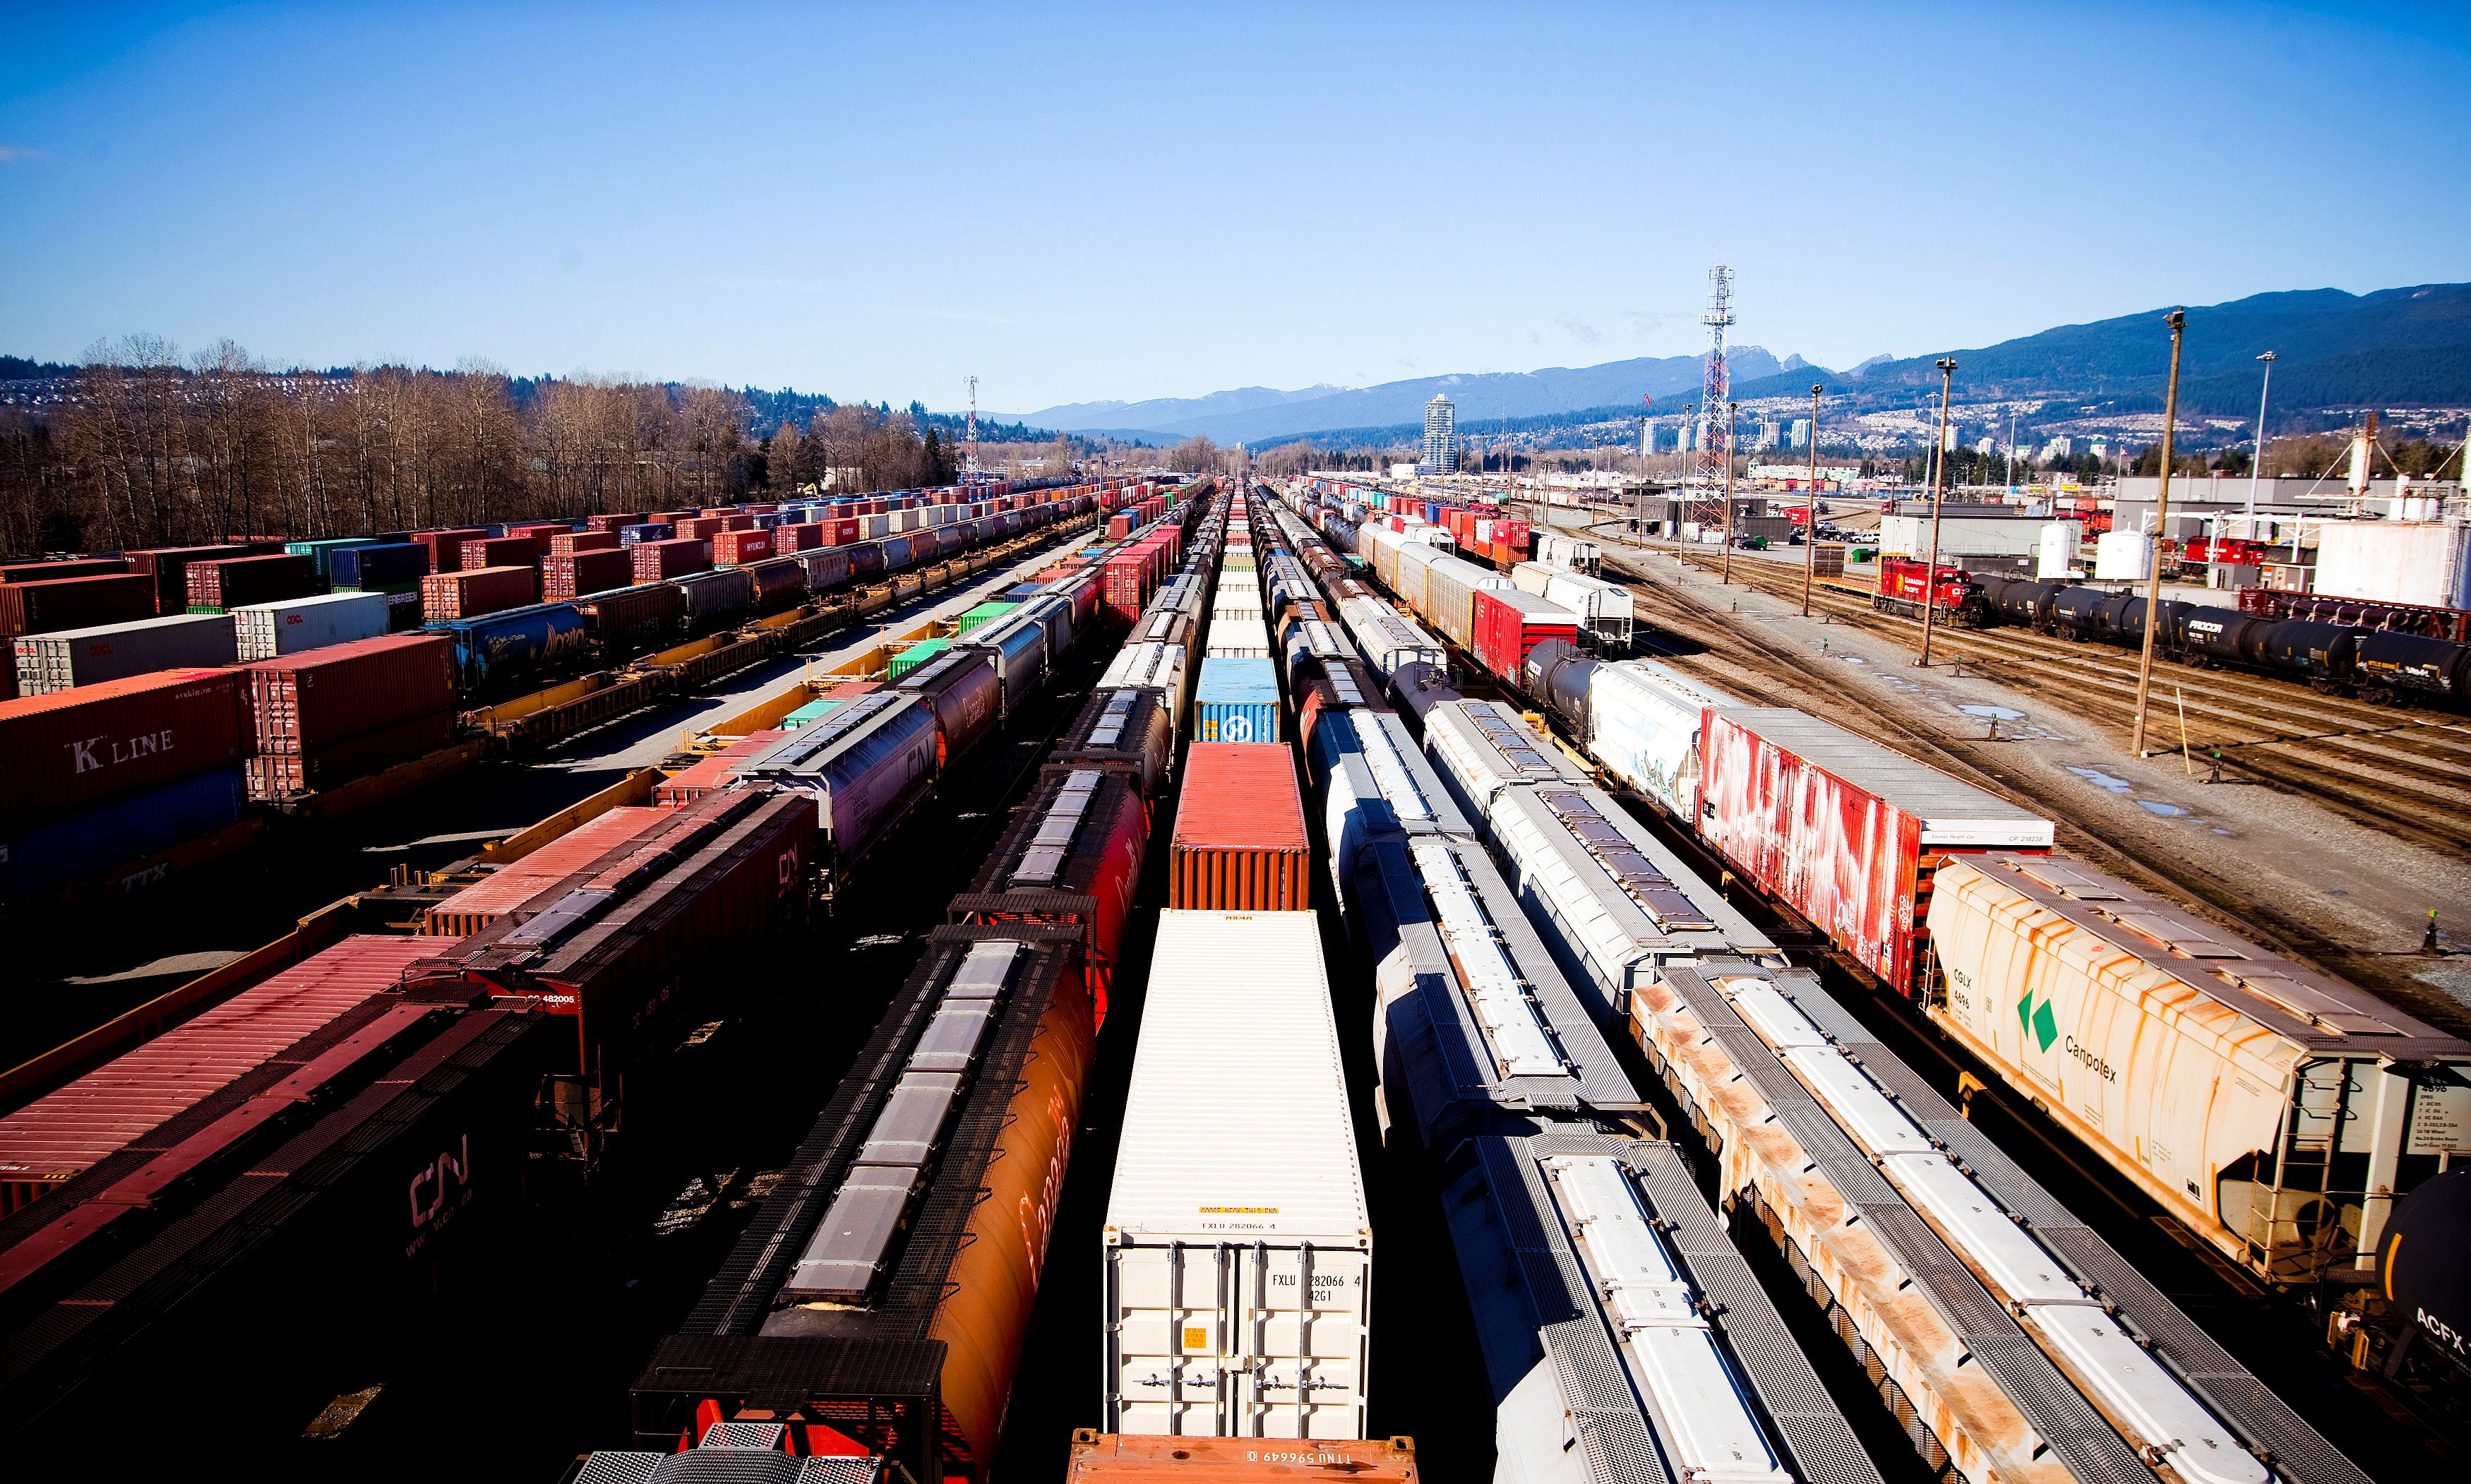 The Canadian Pacific railyard is pictured in Port Coquitlam.